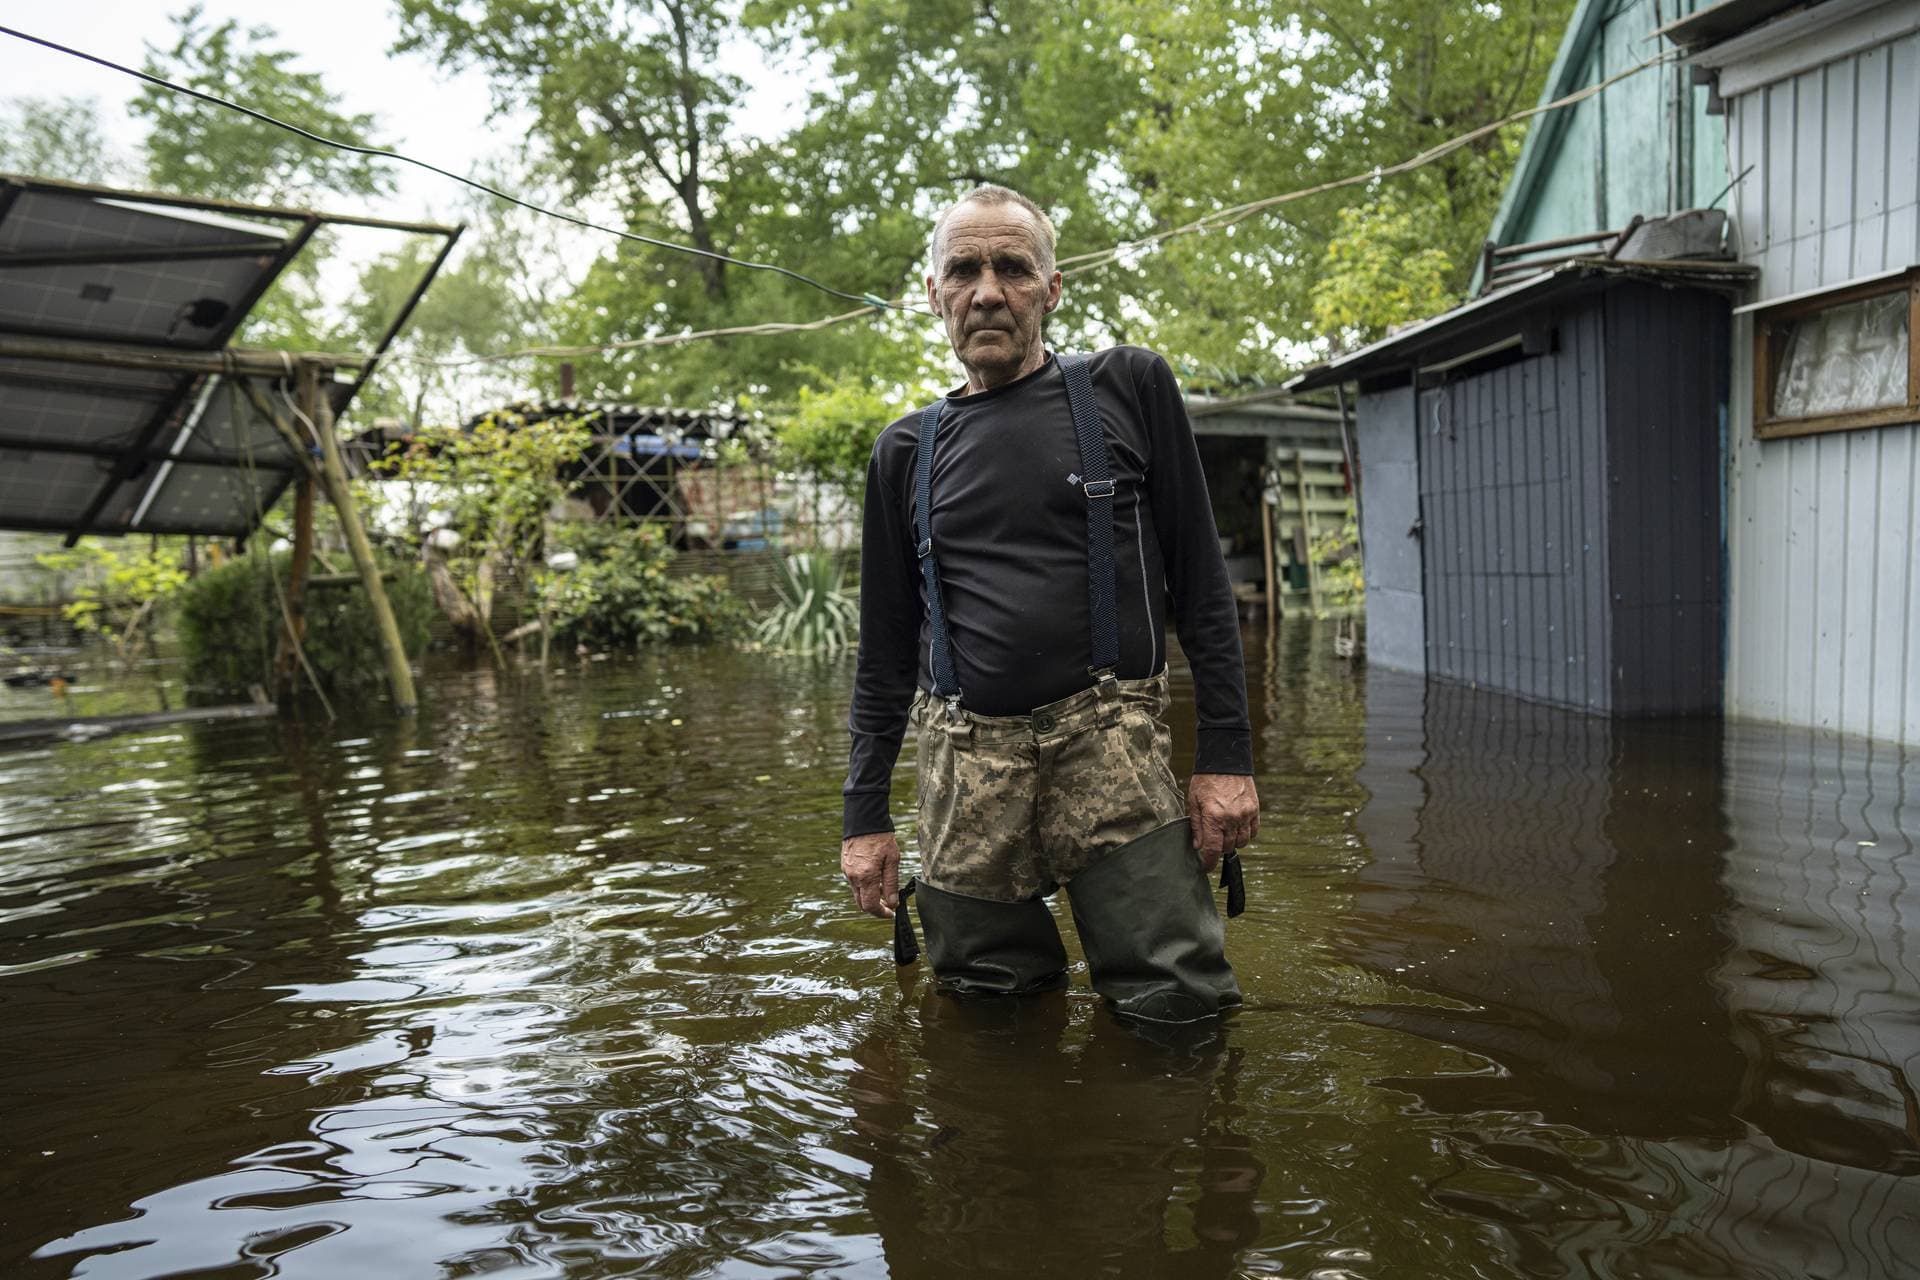 Ihor Medyunov stands in the flooded courtyard of his house on an island at Kakhovka Reservoir on Dnipro River